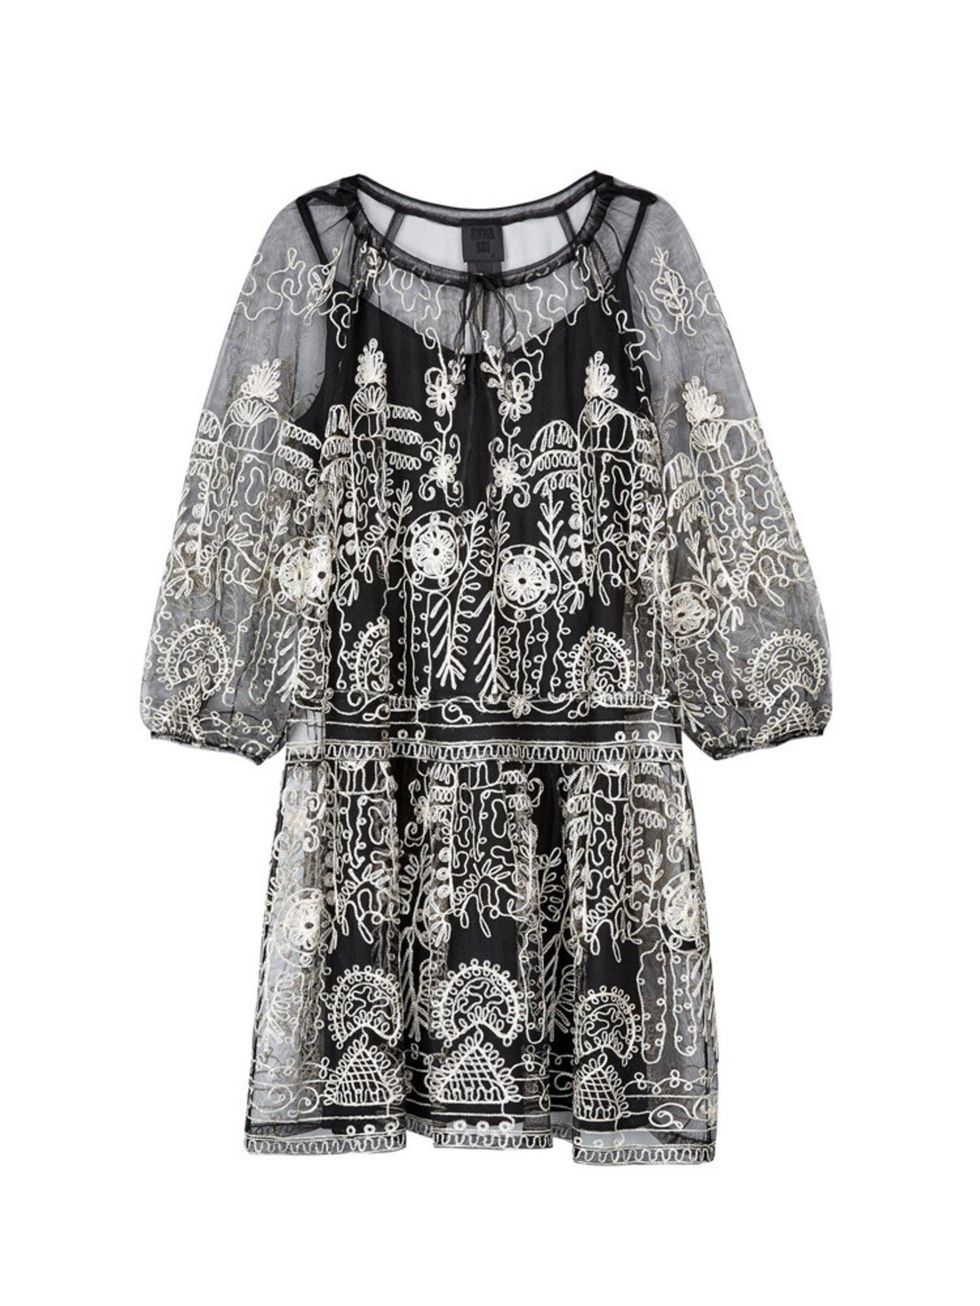 <p>Anna Sui Dress, £280 at <a href="http://www.veryexclusive.co.uk/anna-sui-chainstitch-embroidered-mesh-dress-black/1600050513.prd" target="_blank">veryexclusive.co.uk</a> </p>

<p>Day: dress over jeans is the new way dressing down - pair this with a <a 